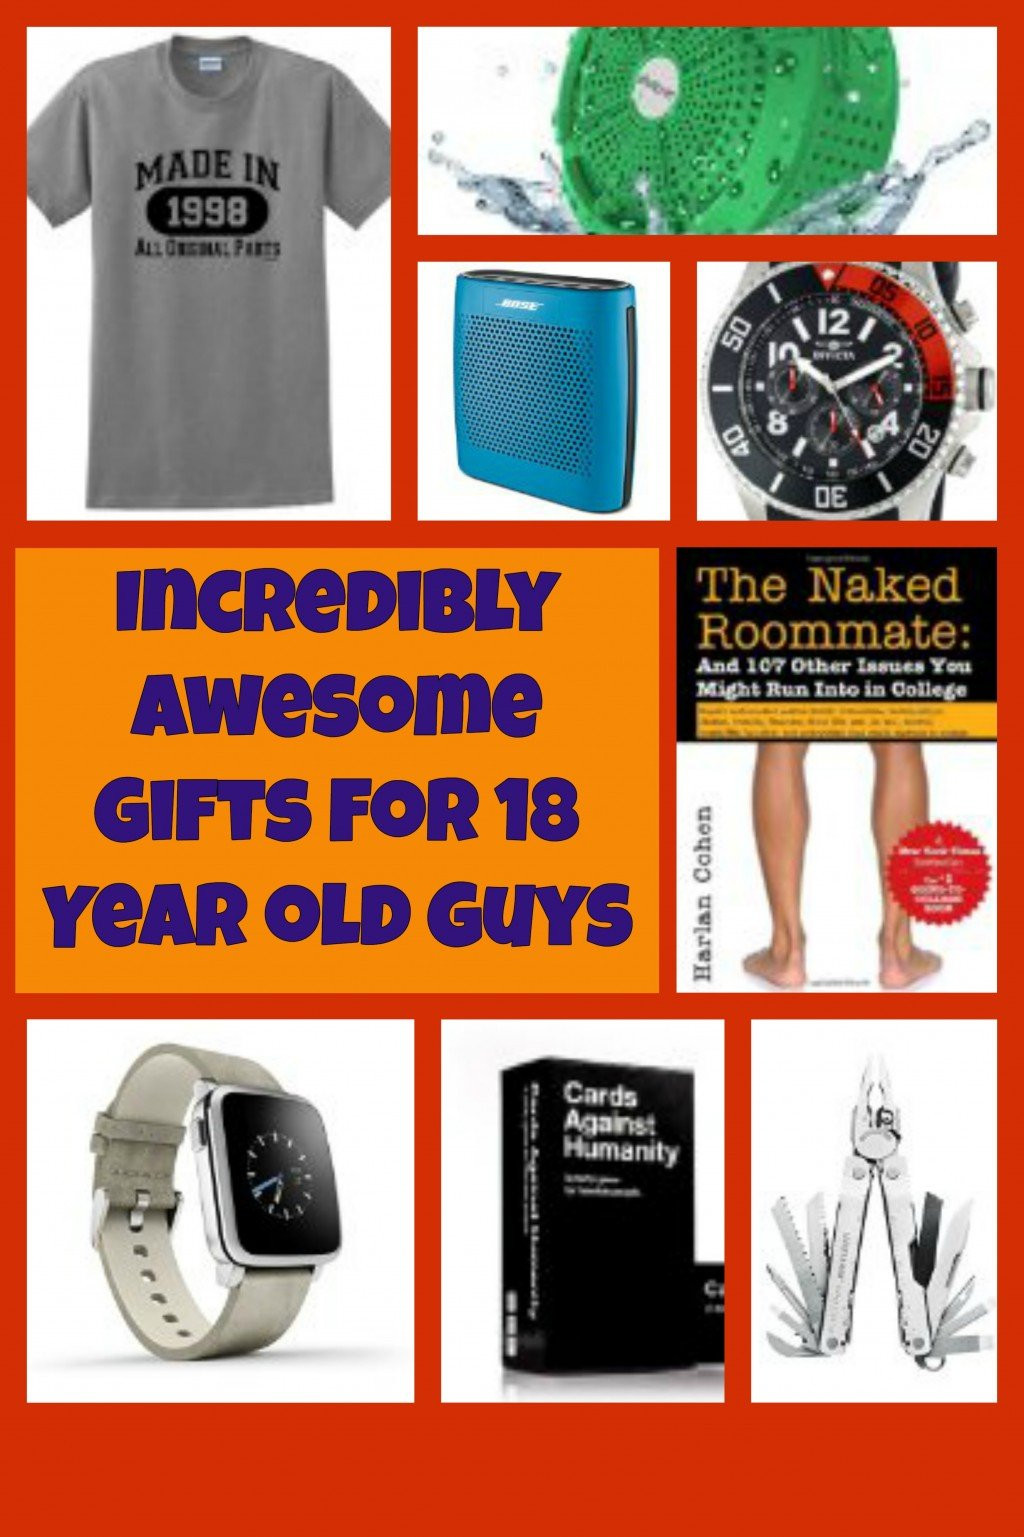 Birthday Gift Ideas For 18 Year Old Boy
 Incredibly Awesome Gifts for 18 Year Old Boys